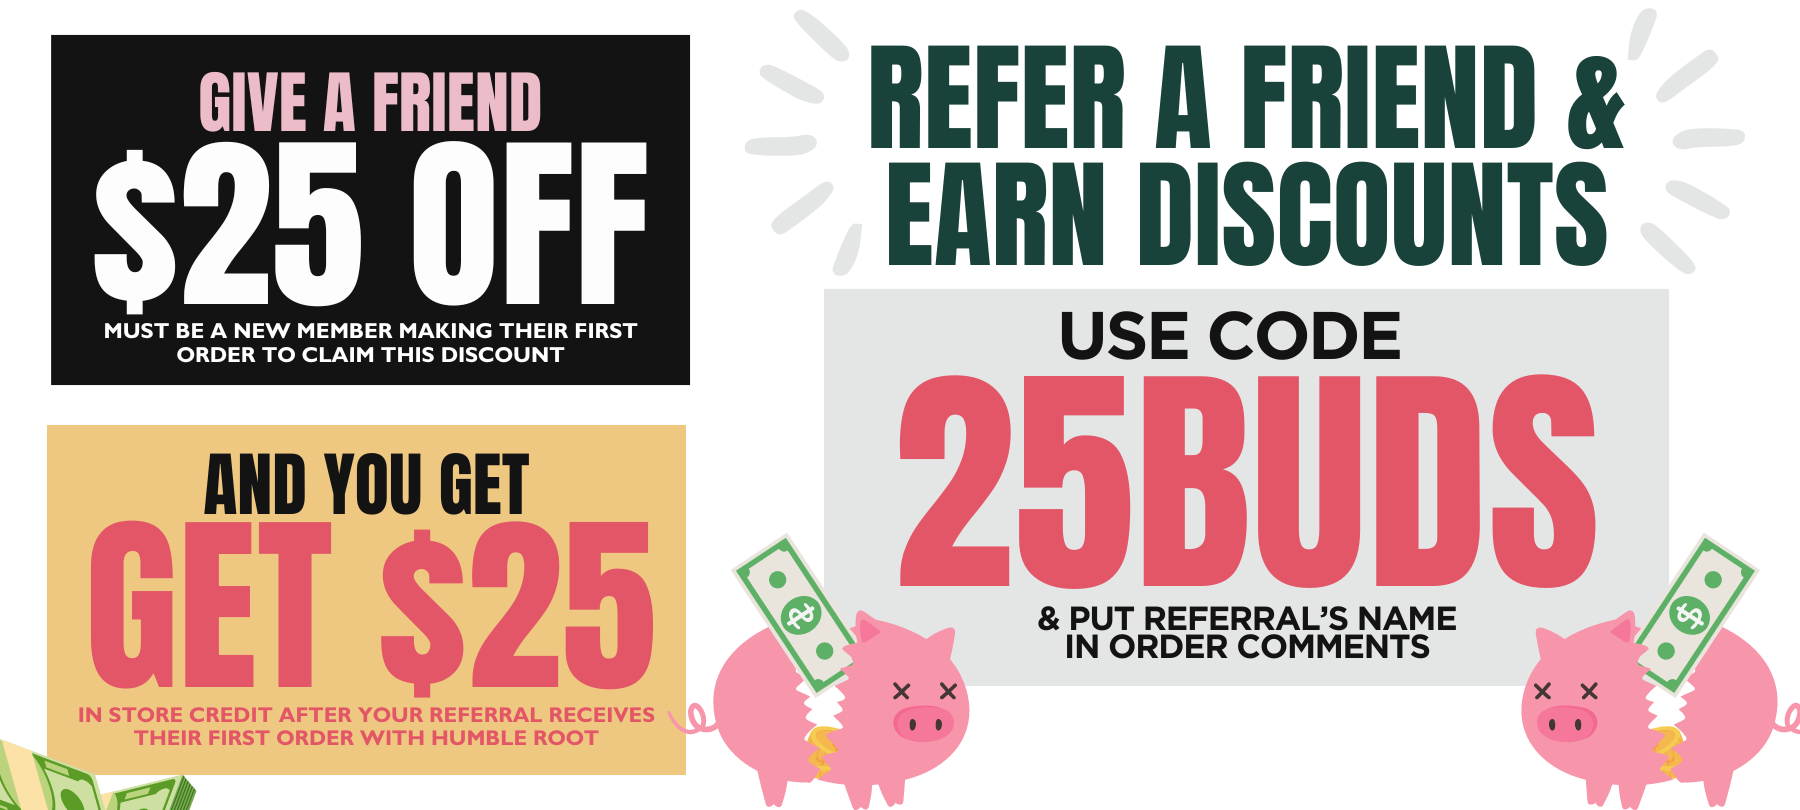 Refer a new friend & they get $25 off AND you get $25 in store credit